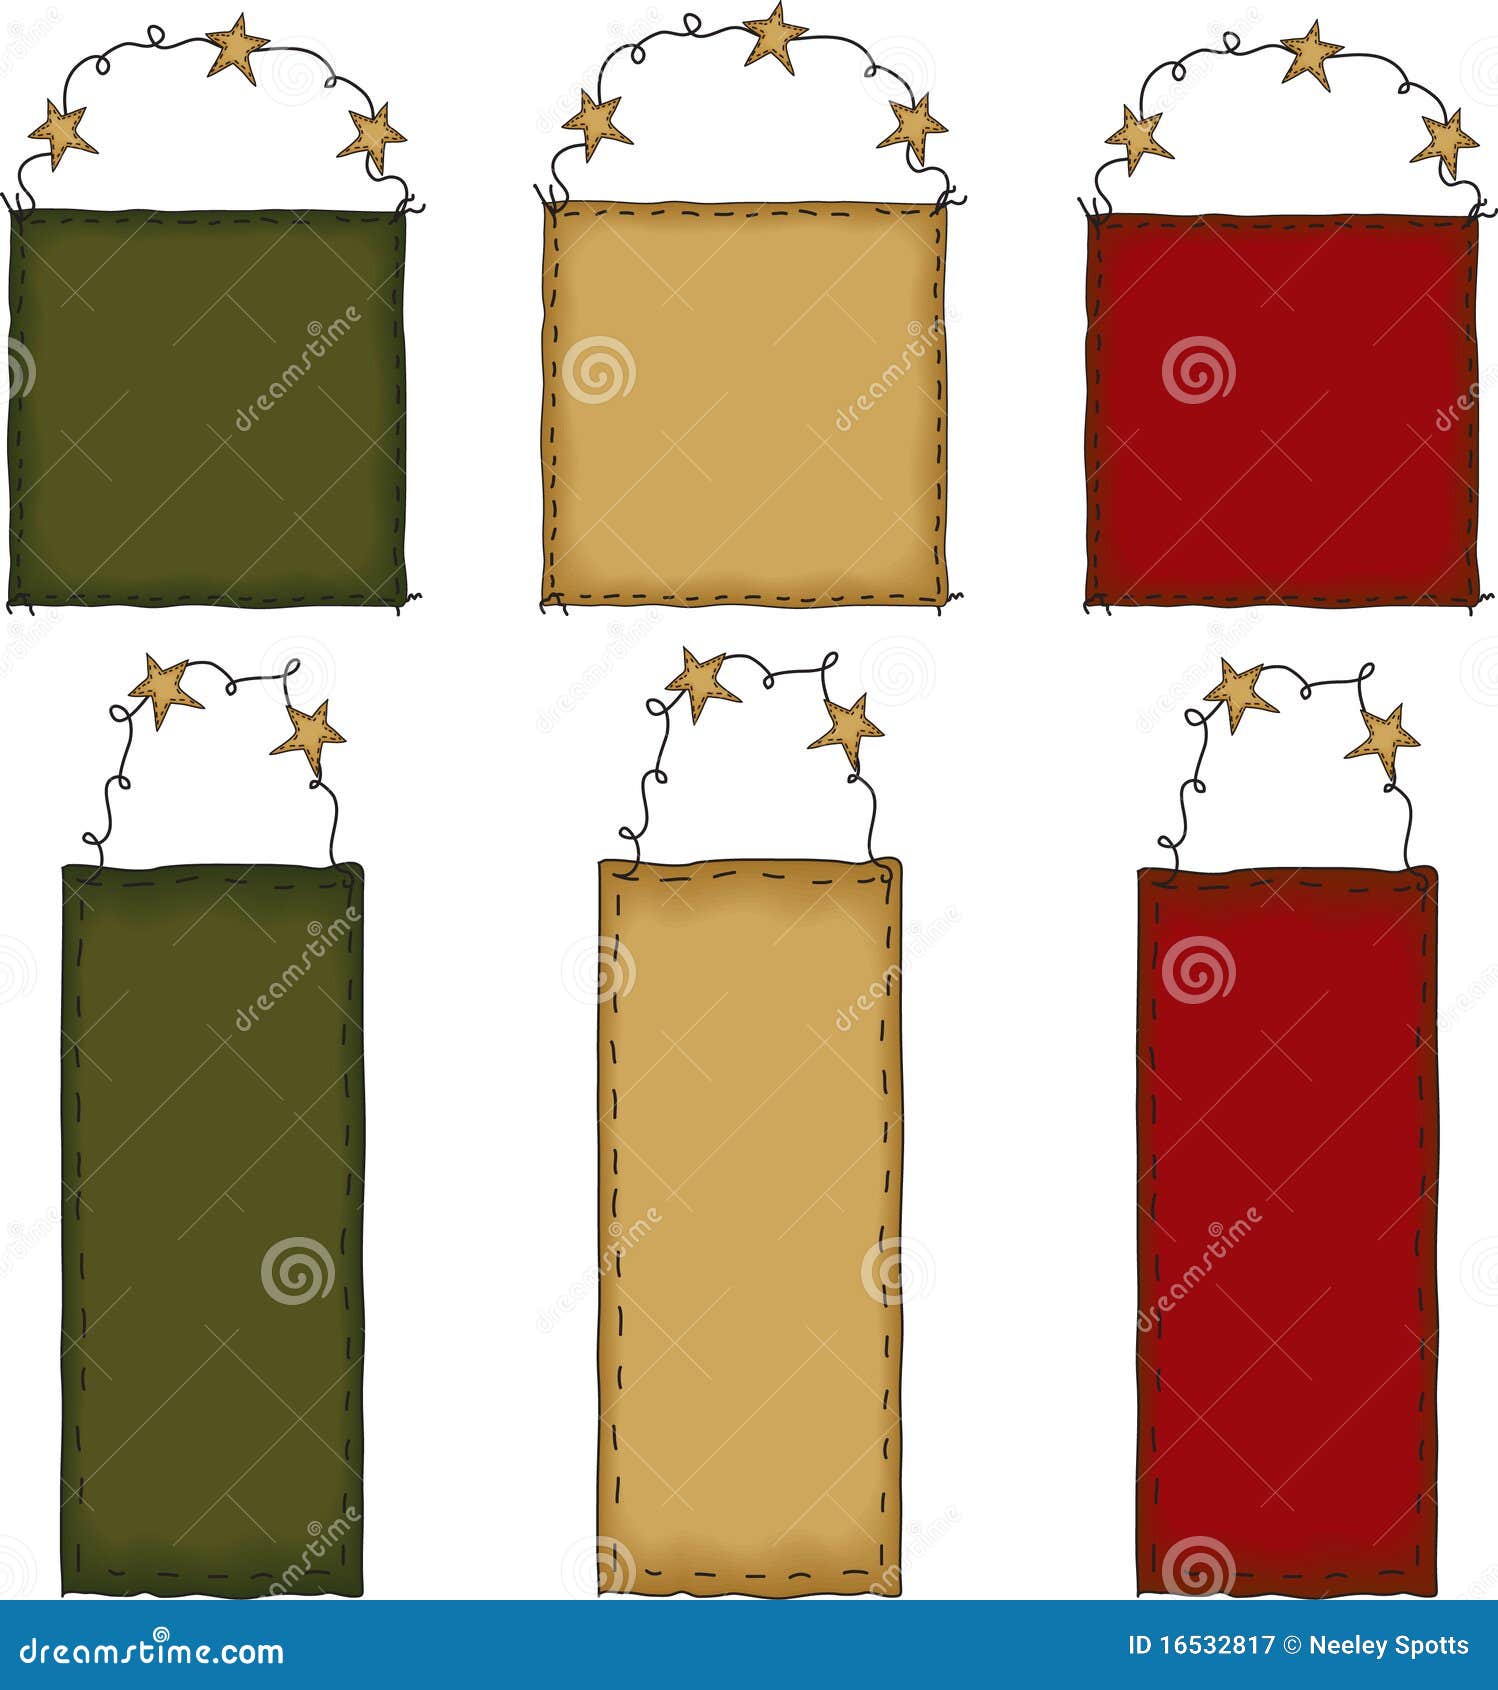 clipart gift tags free - photo #43